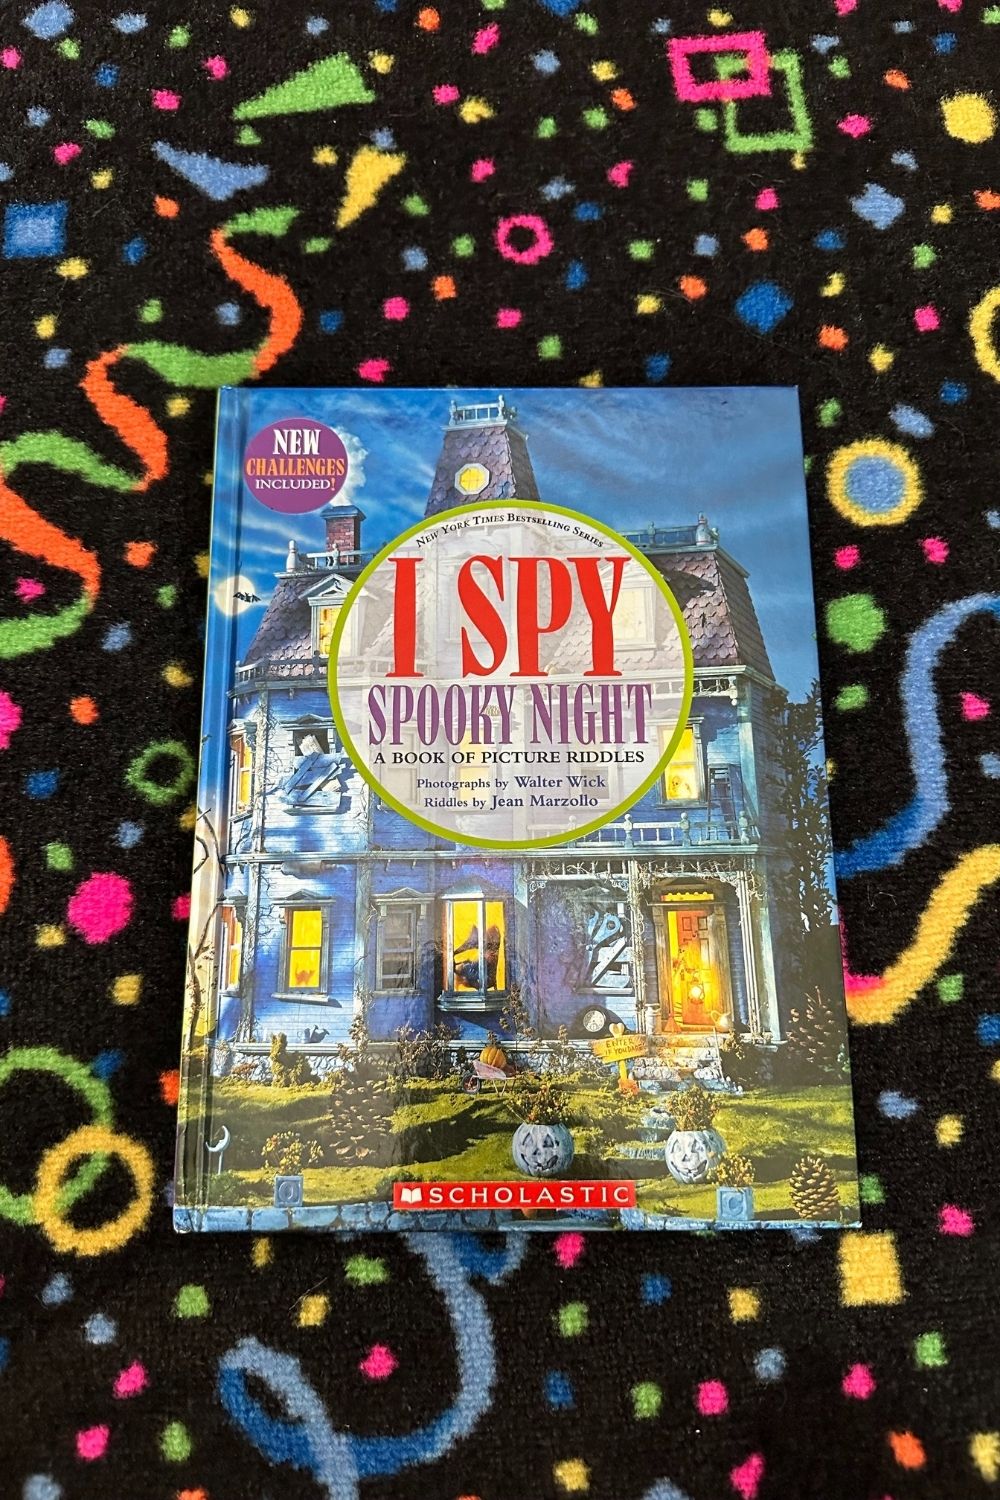 1996 I SPY SPOOKY NIGHT: A BOOK OF PICTURE RIDDLES*